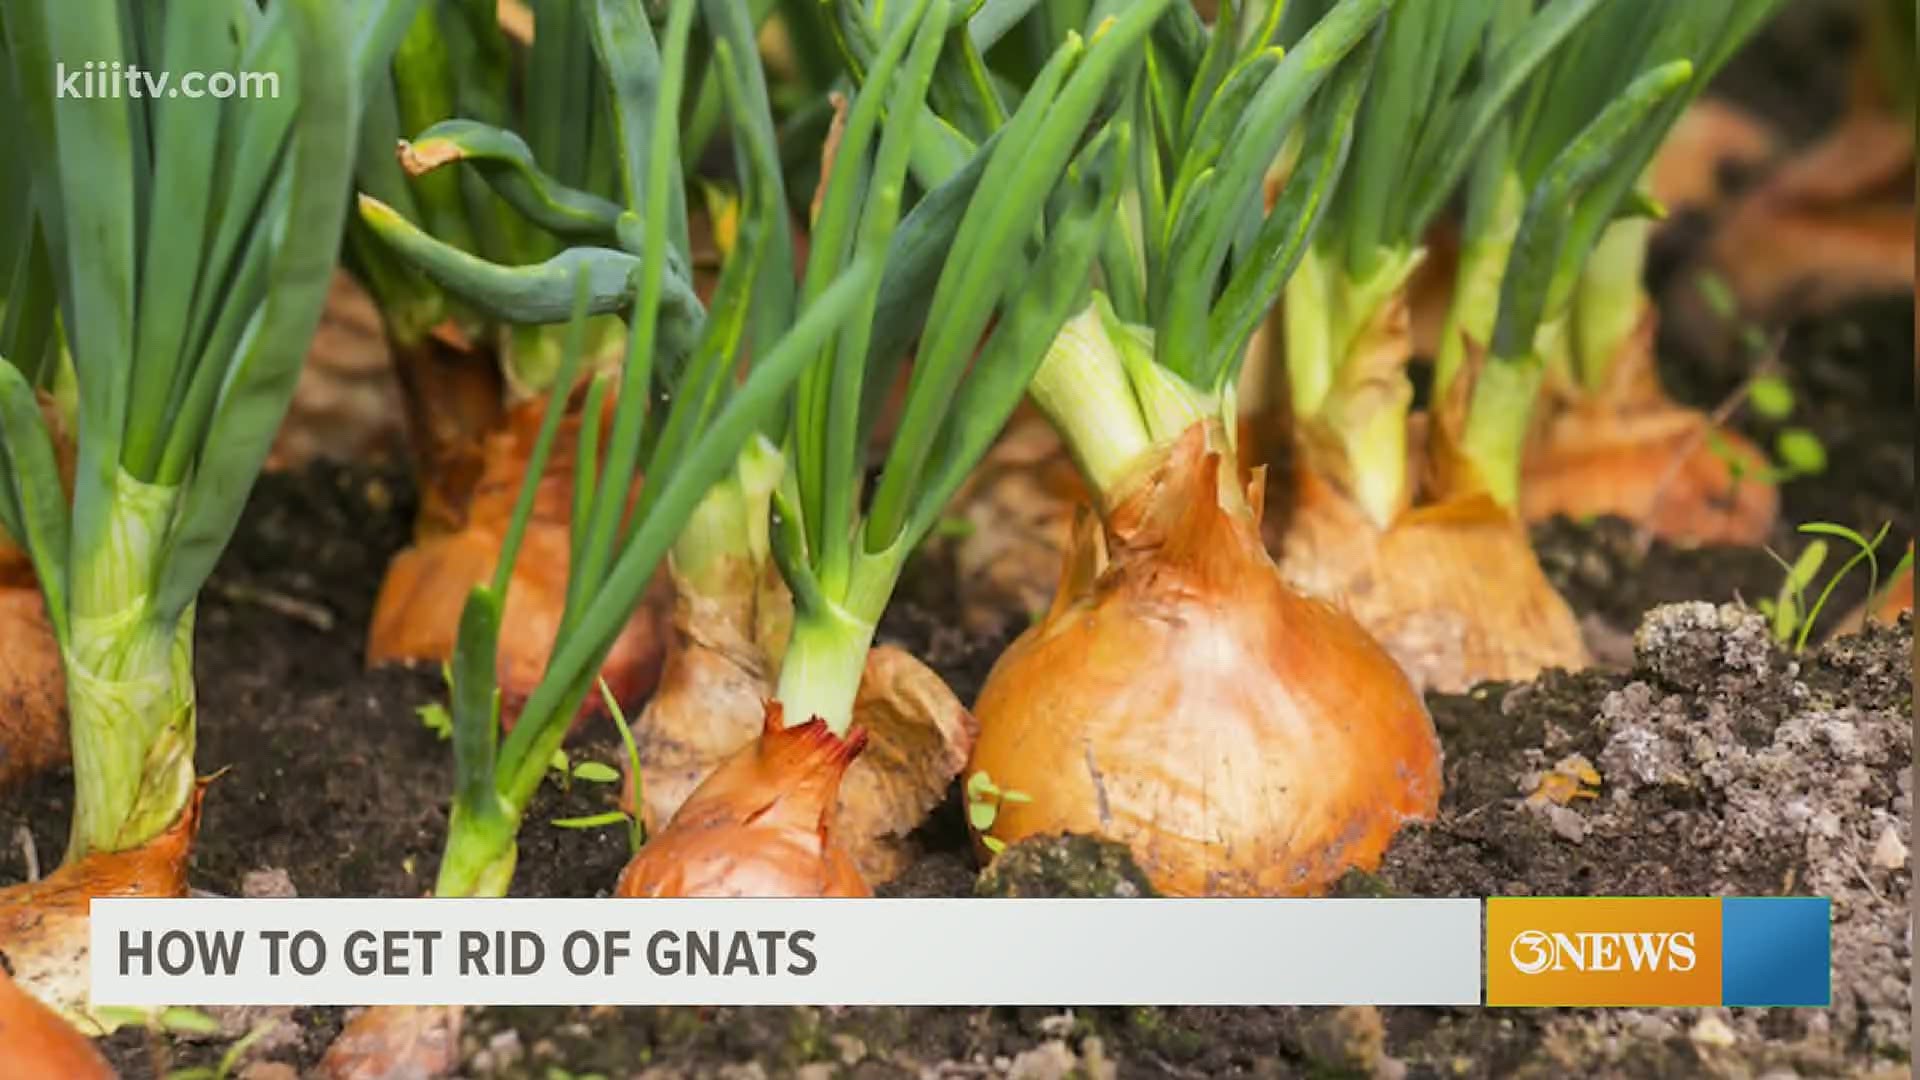 Root rot can be determined by the presence of gnats